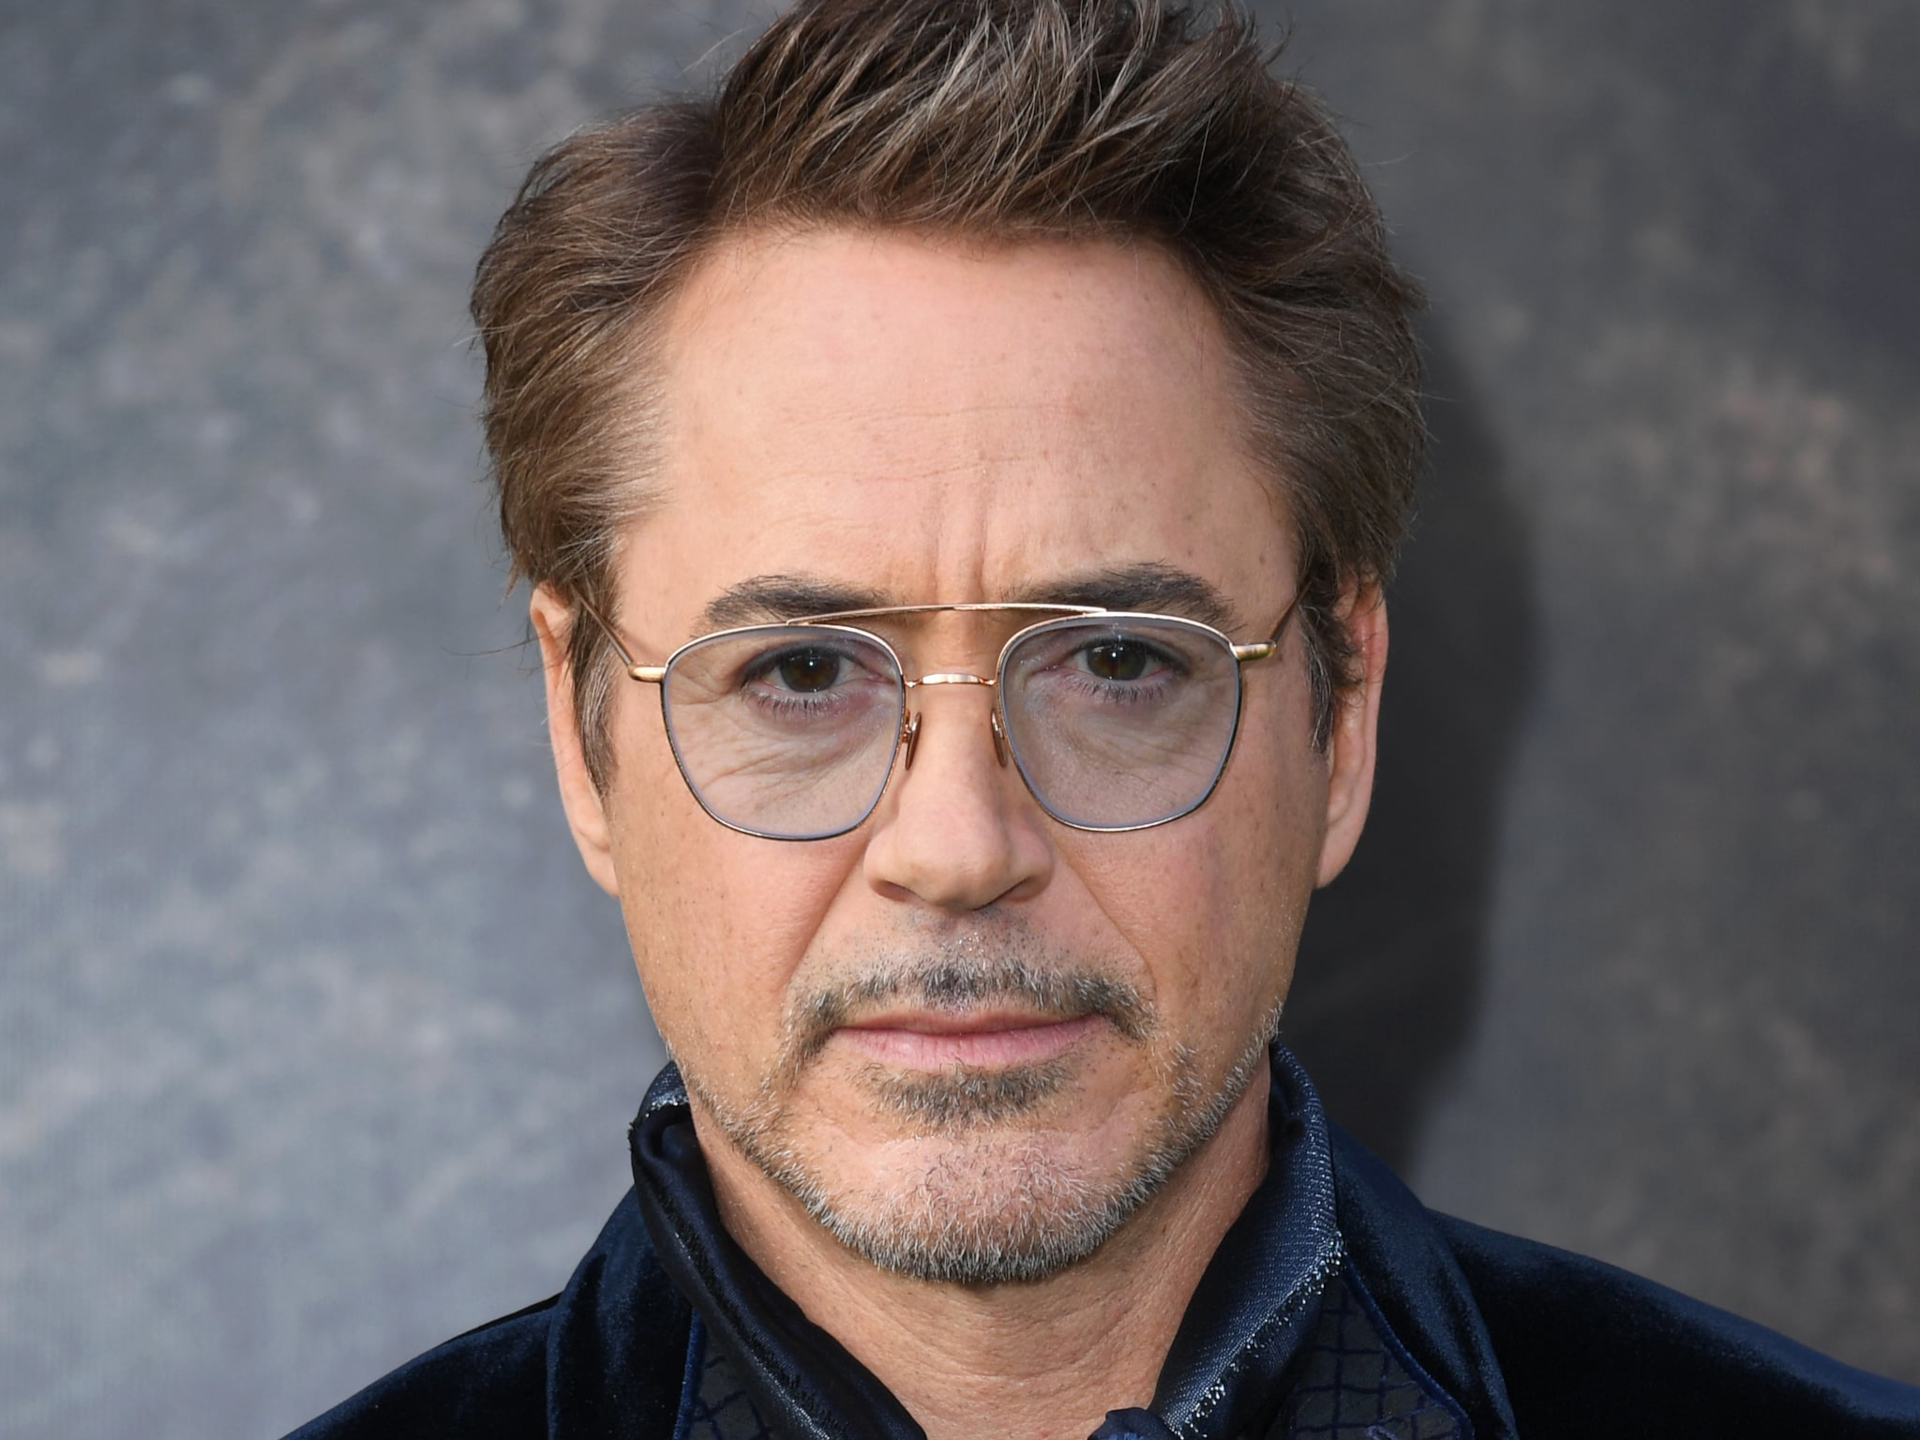 Robert Downey Jr.: From Prodigy to Icon – A Journey of Triumph and Redemption